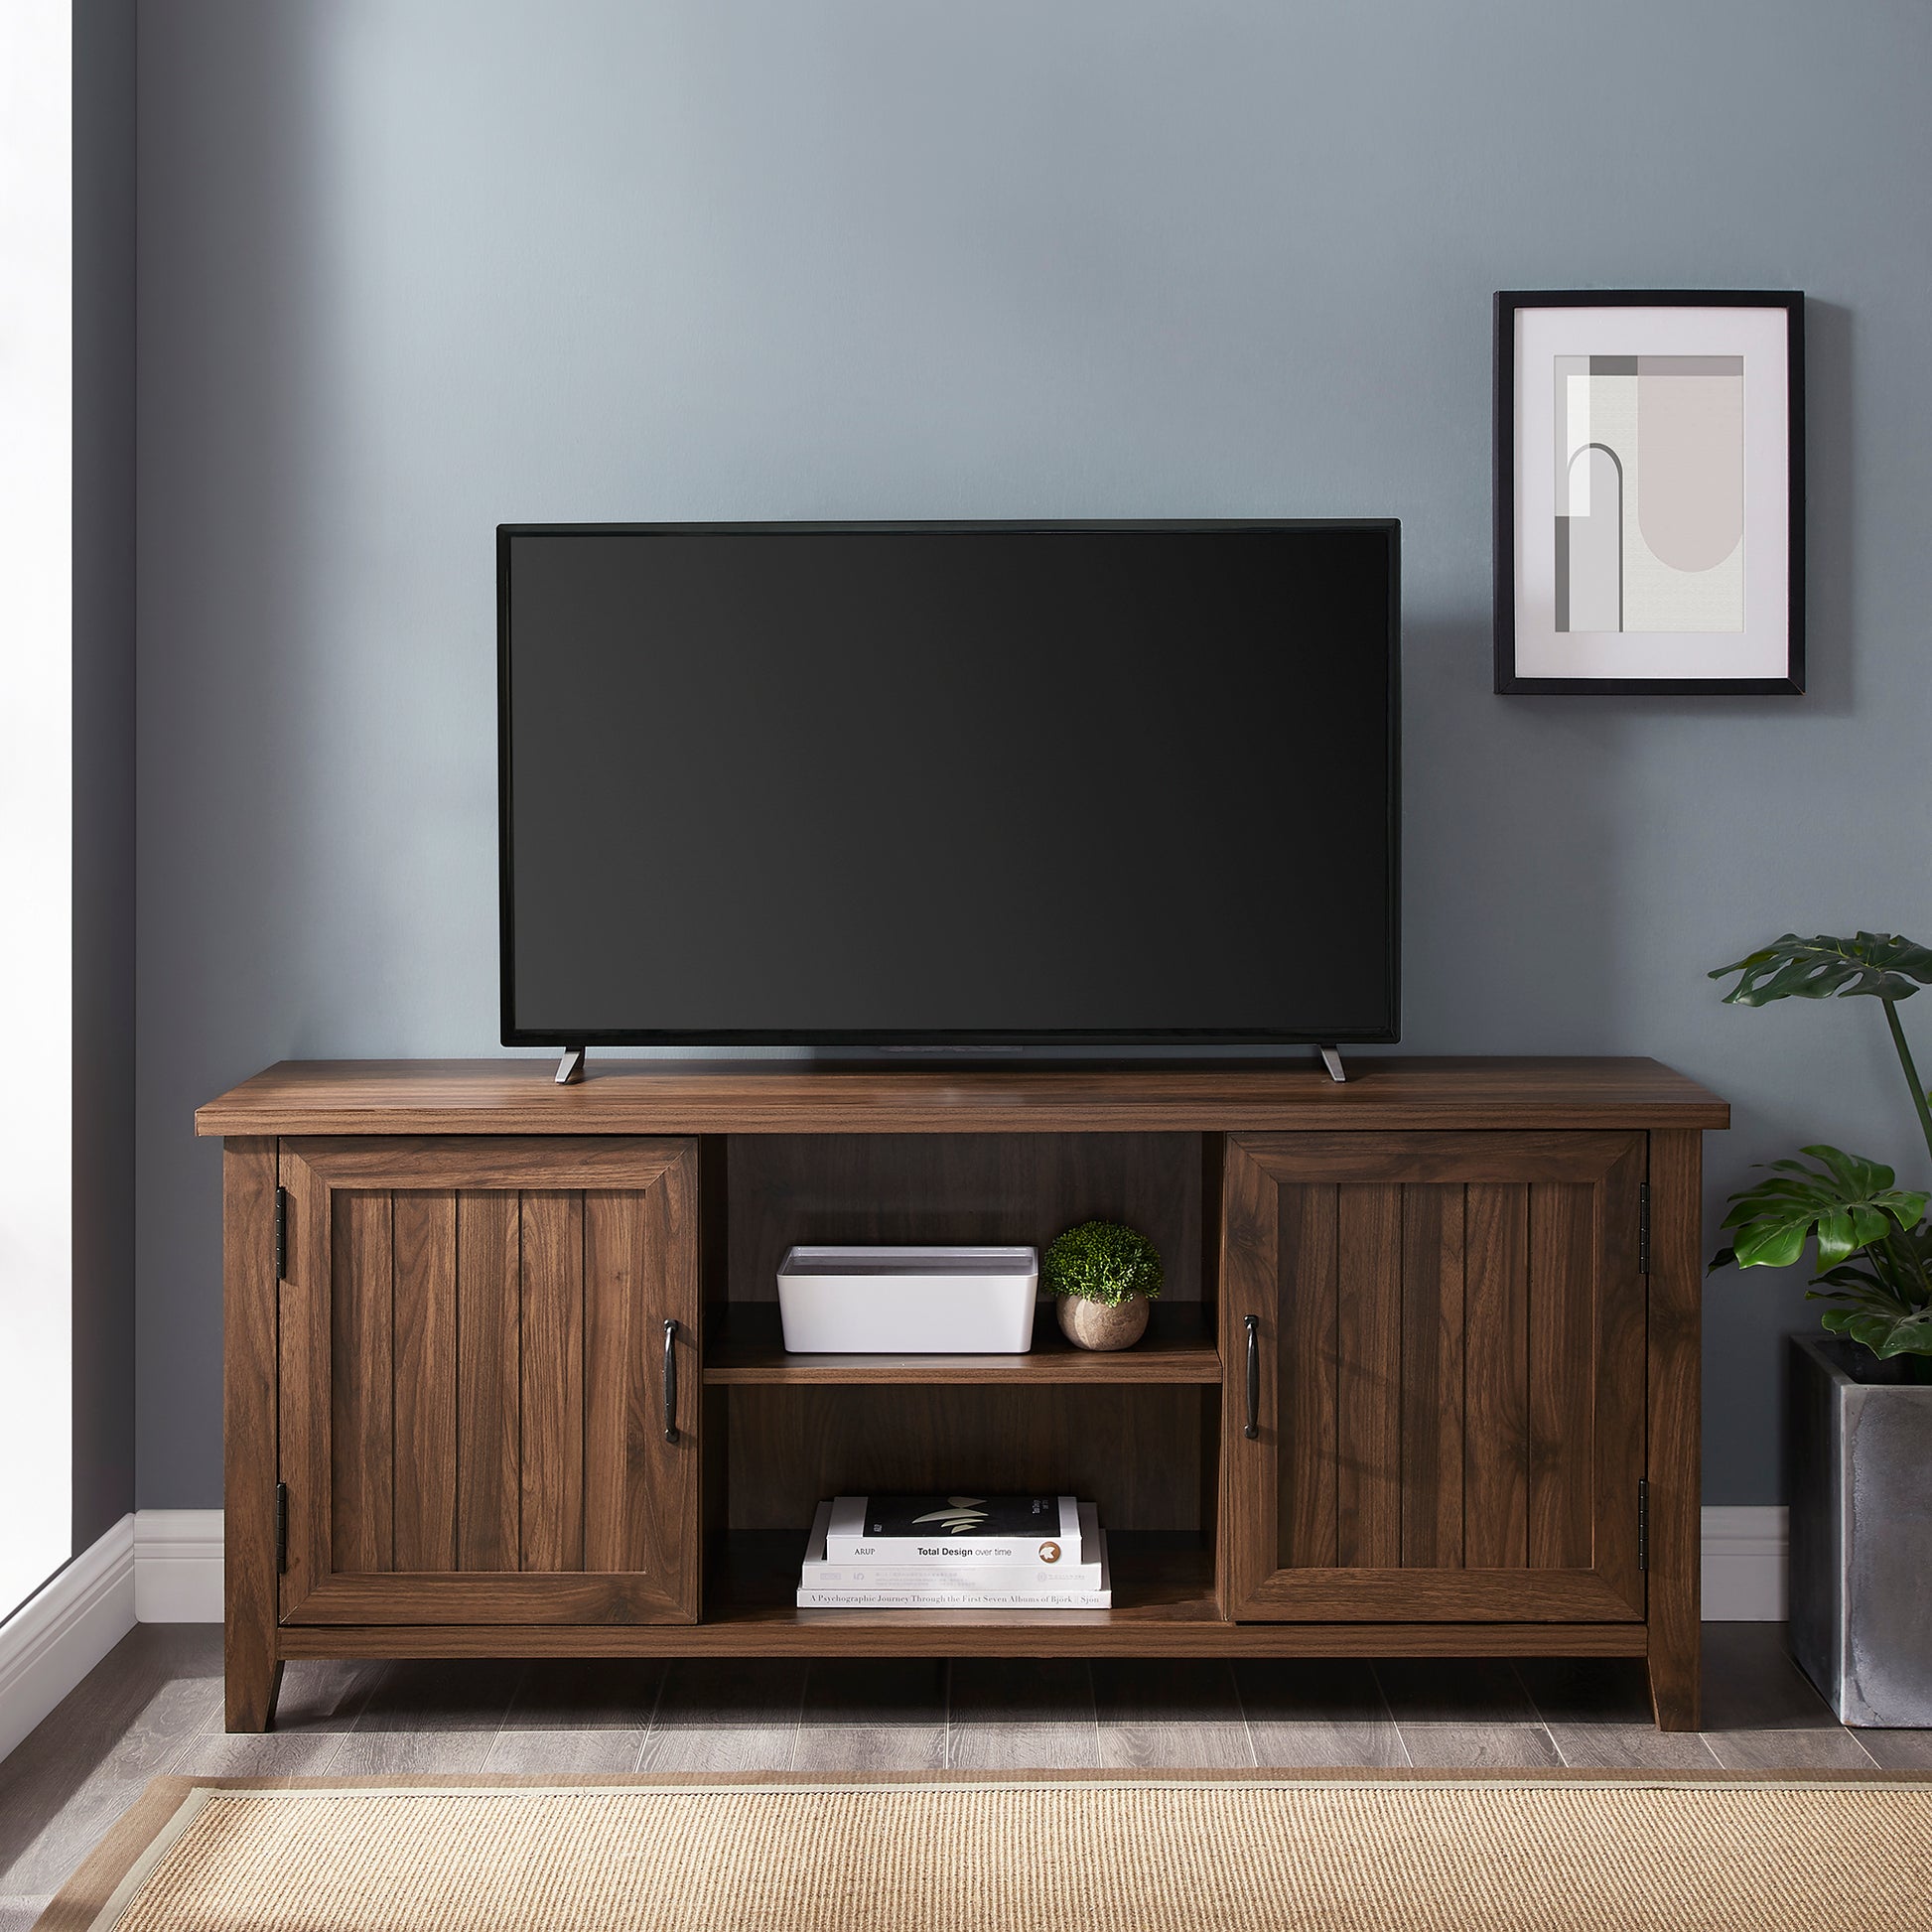 Classic Grooved Door Tv Stand For Tvs Up To 65"